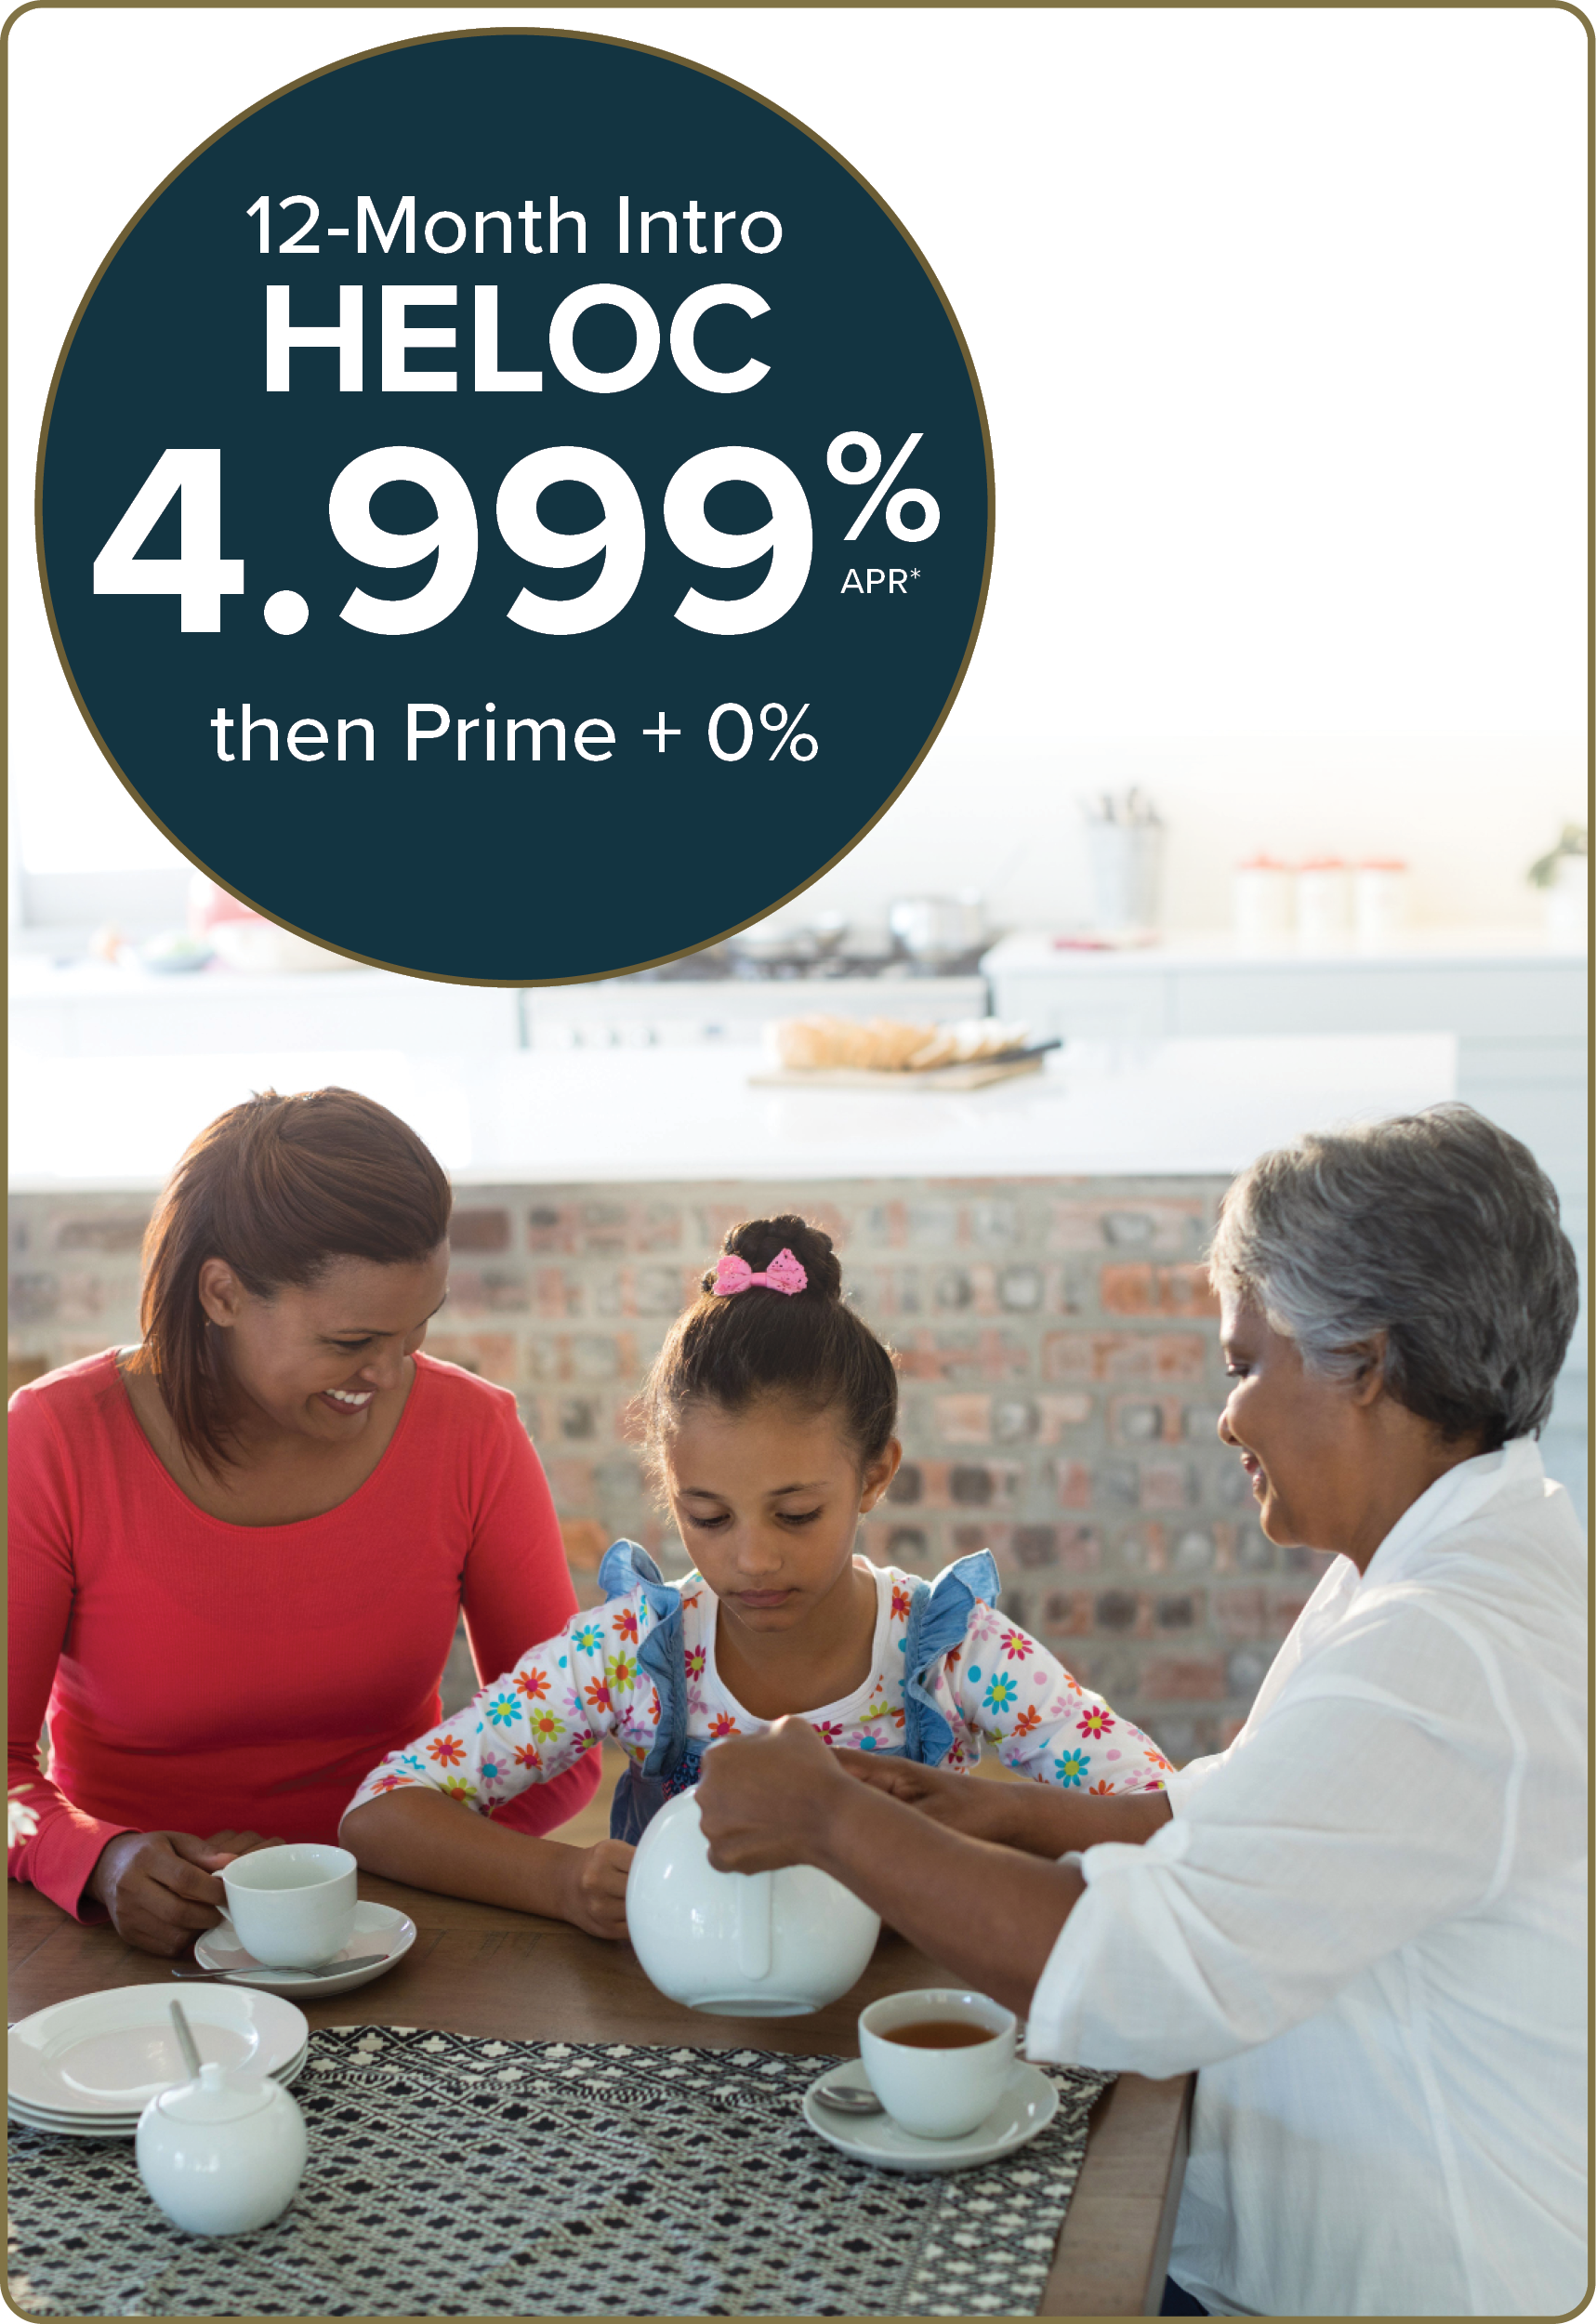 12-Month intro HELOC 4.999% APR, then Prime + 0%